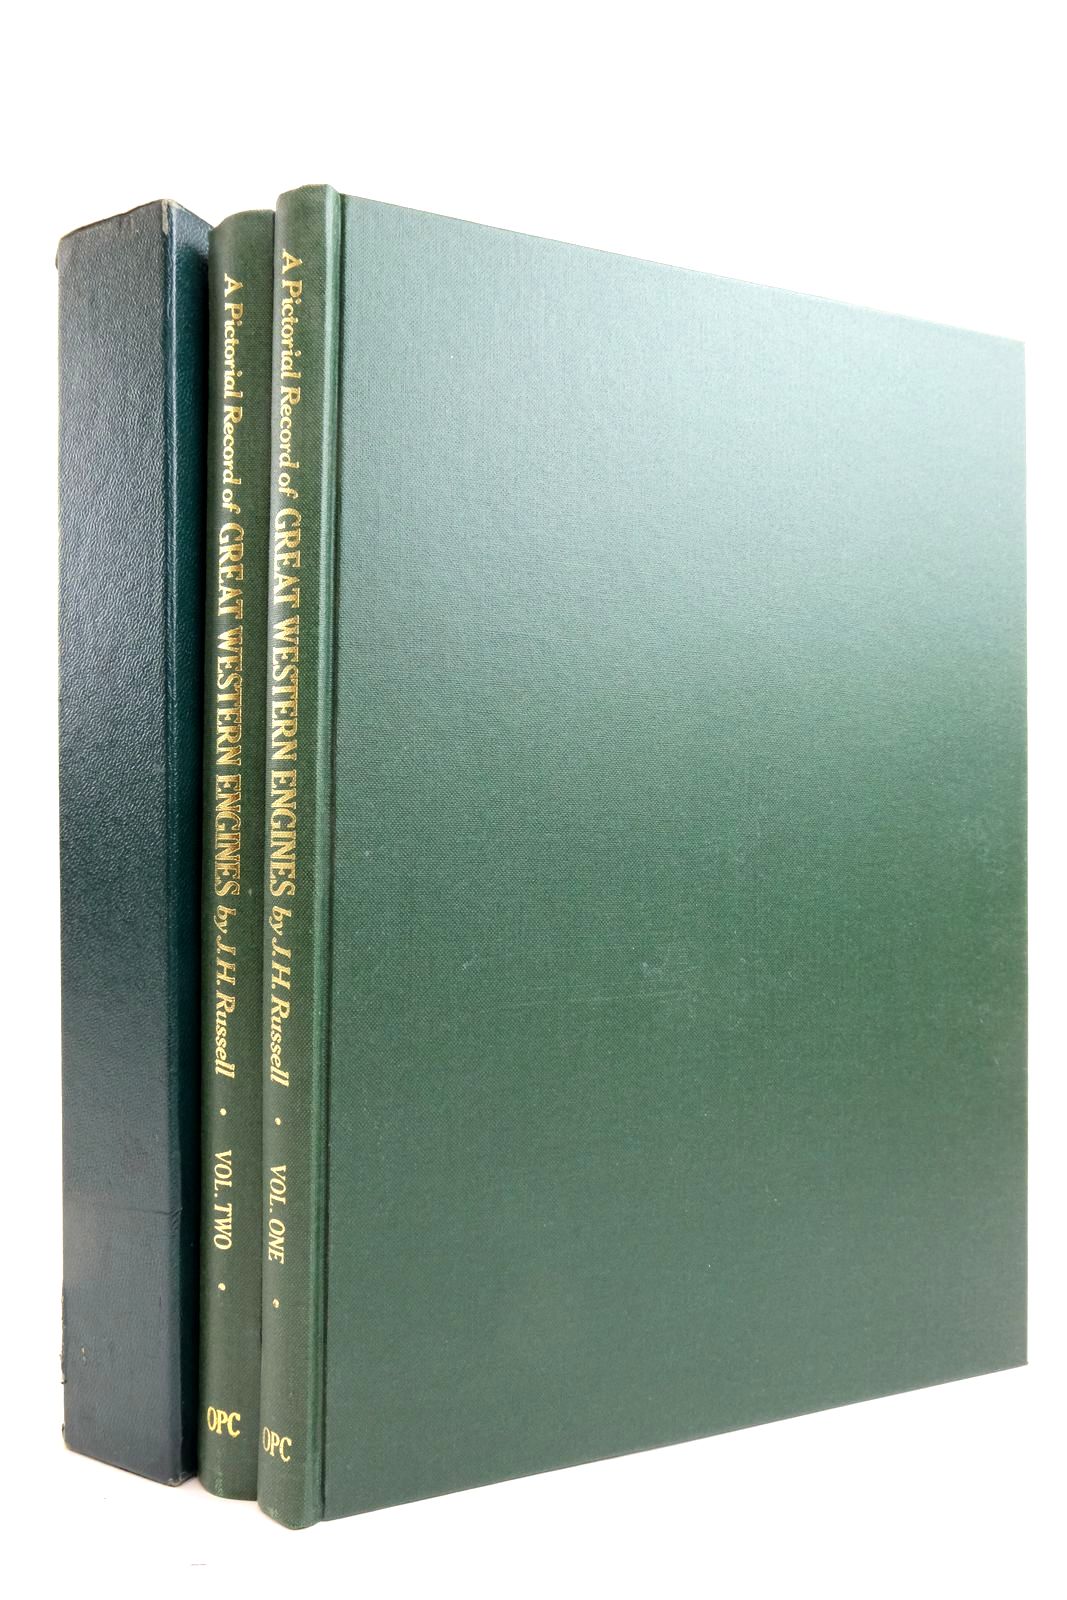 Photo of A PICTORIAL RECORD OF GREAT WESTERN ENGINES (2 VOLS) written by Russell, J.H. published by Oxford Publishing (STOCK CODE: 2136446)  for sale by Stella & Rose's Books